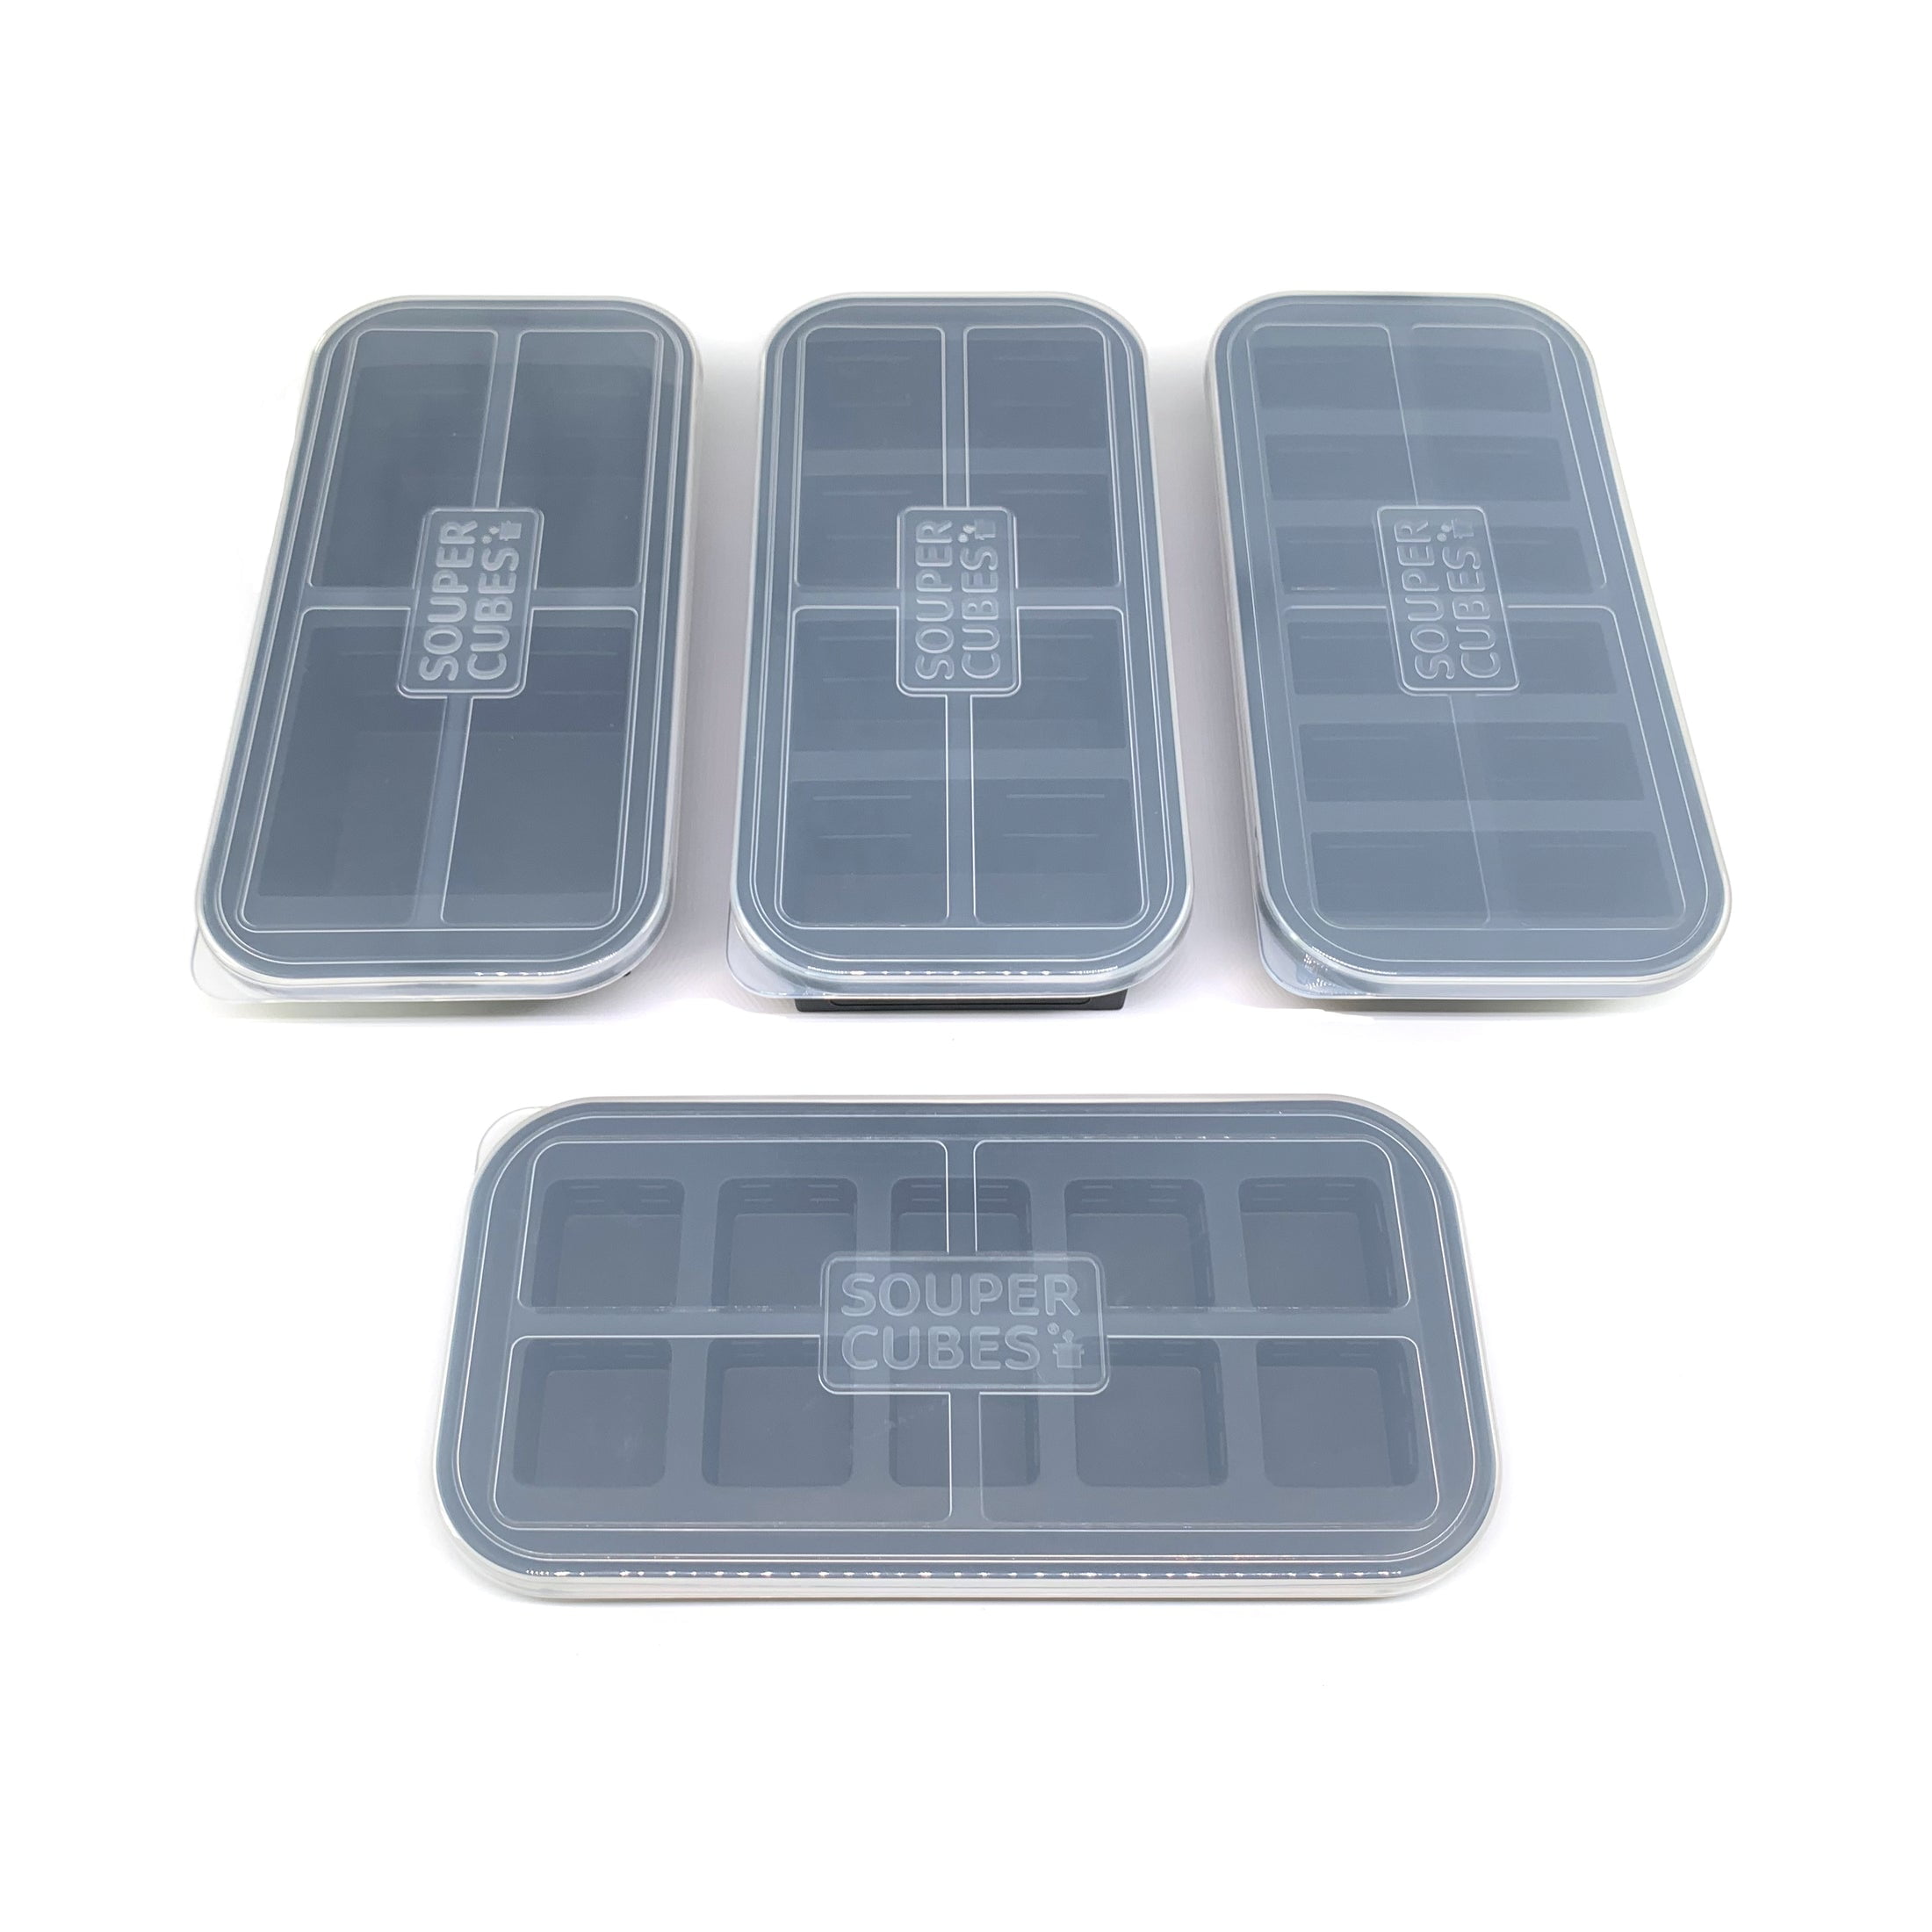 Souper Cubes Cookie Dough Freezer Trays, Set of 2 – To The Nines